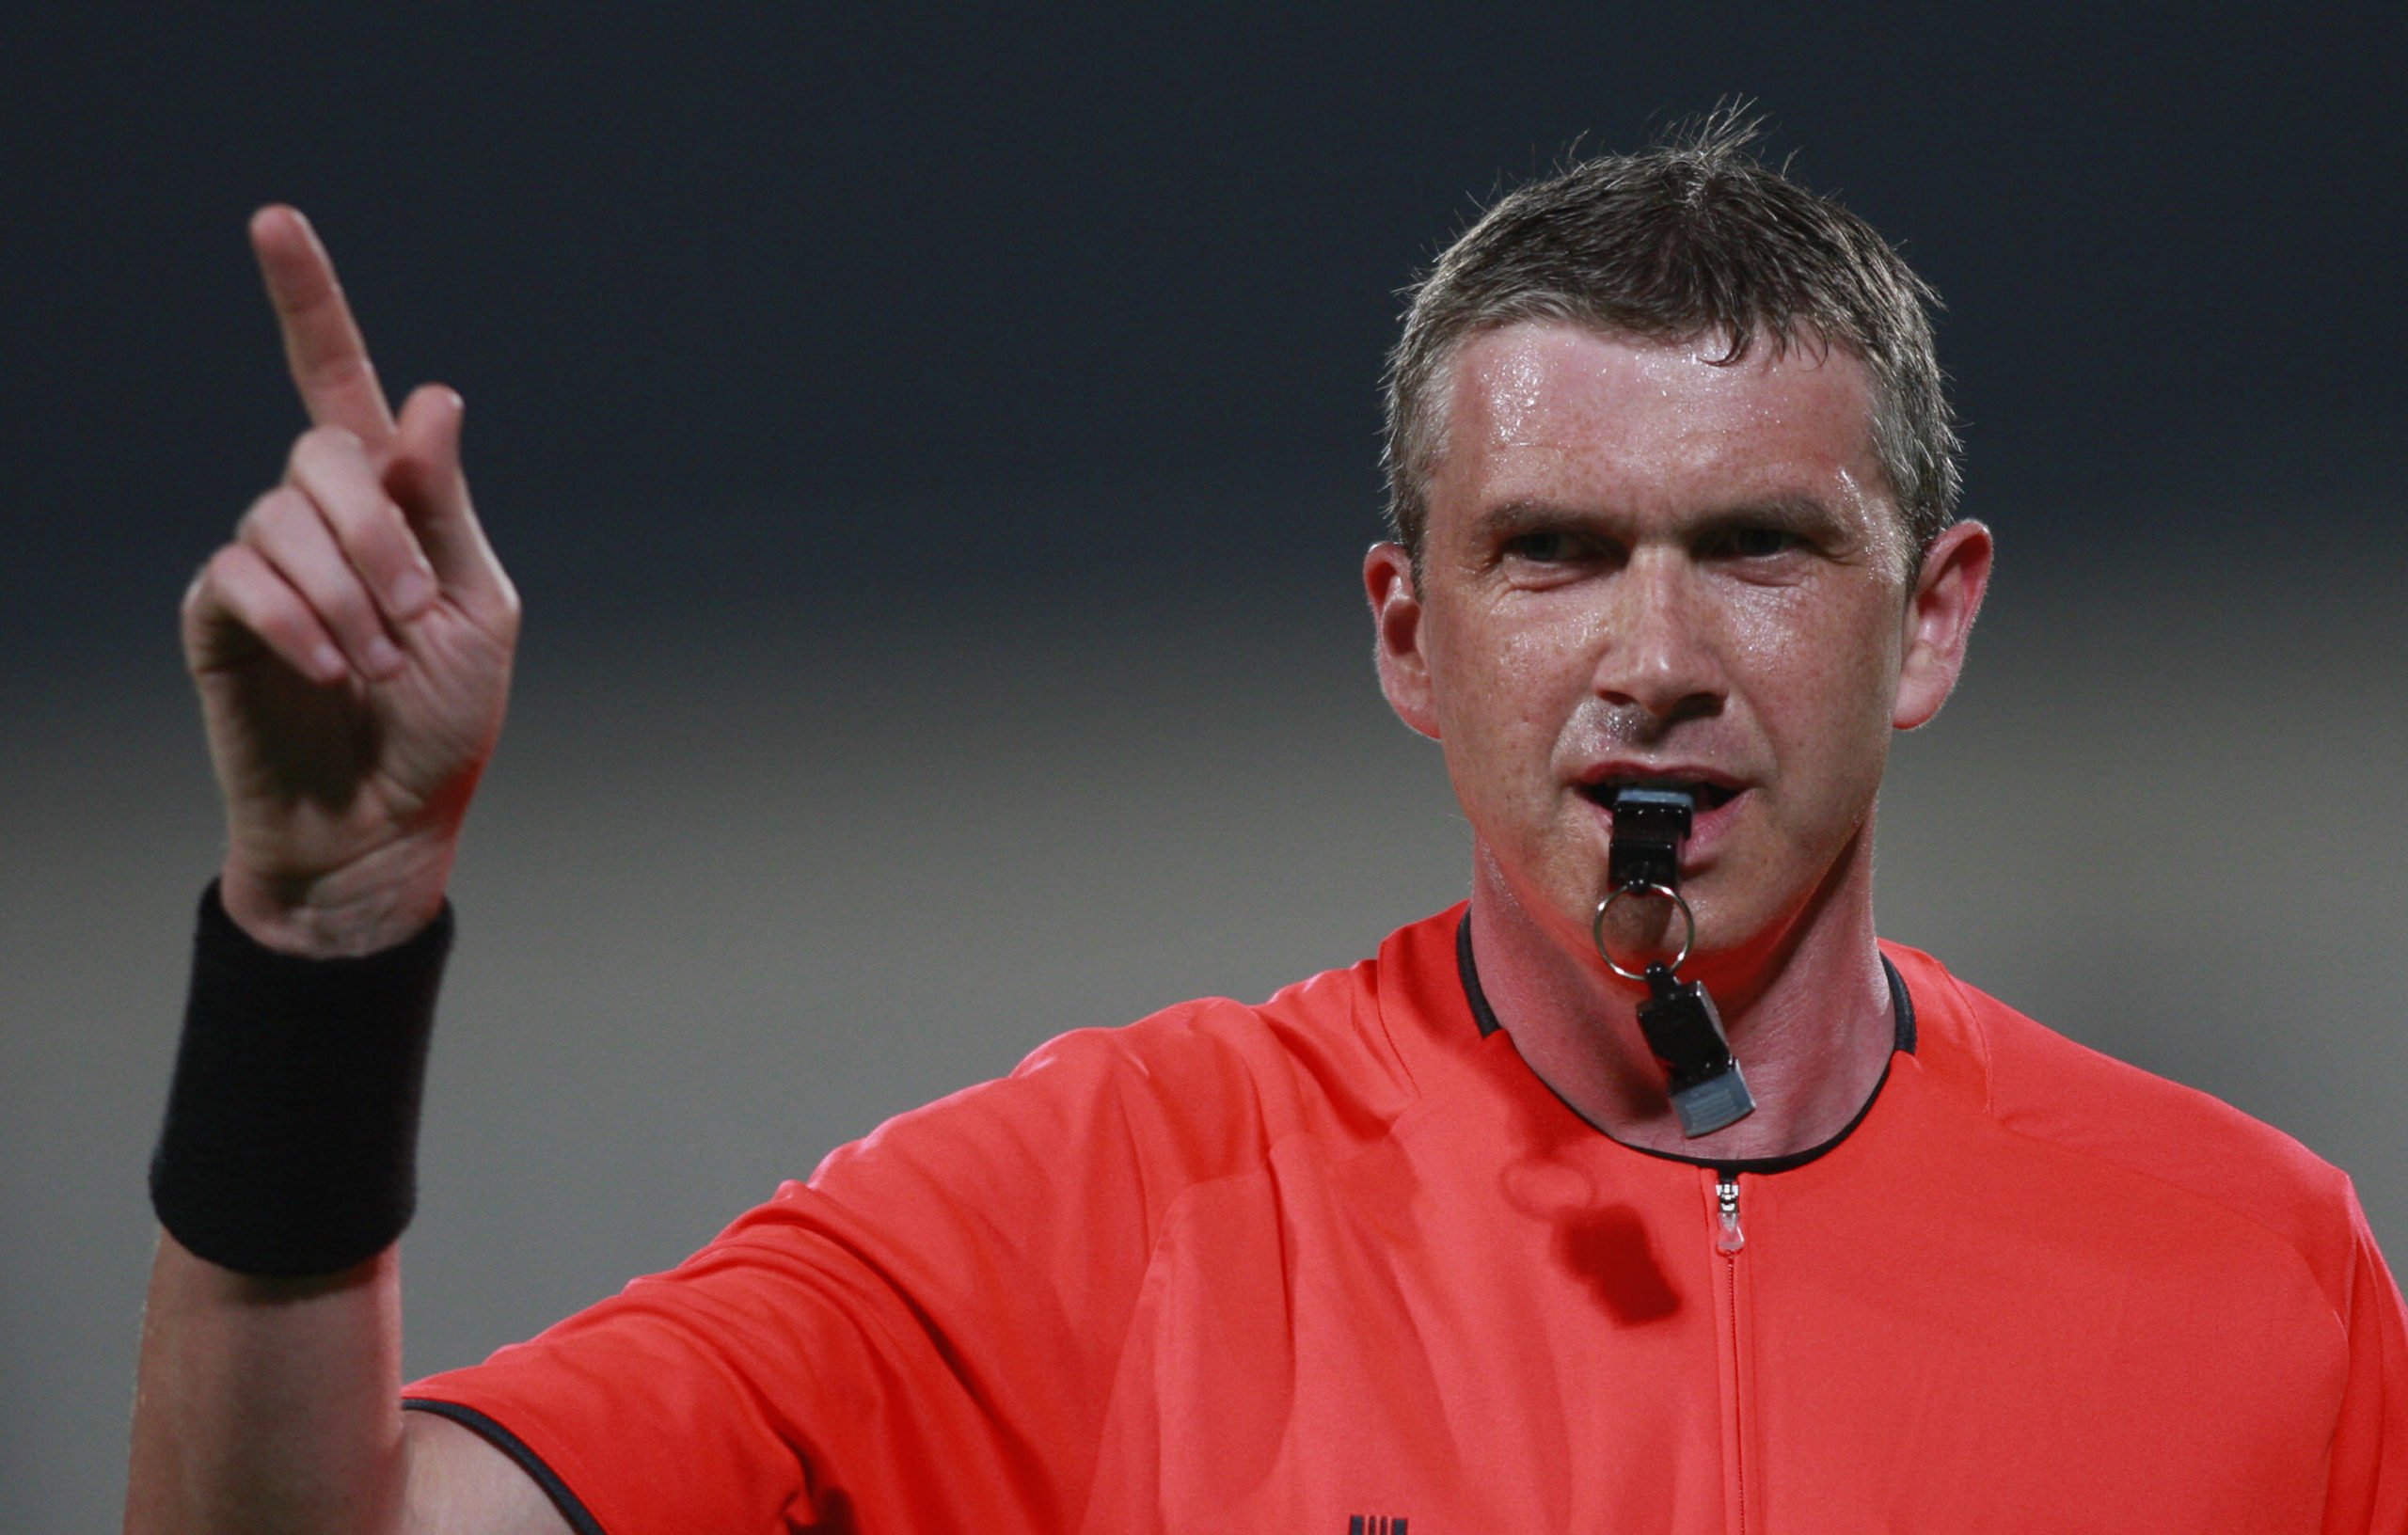 Referee claims he was blacklisted from officiating Celtic derbies regardless of performance